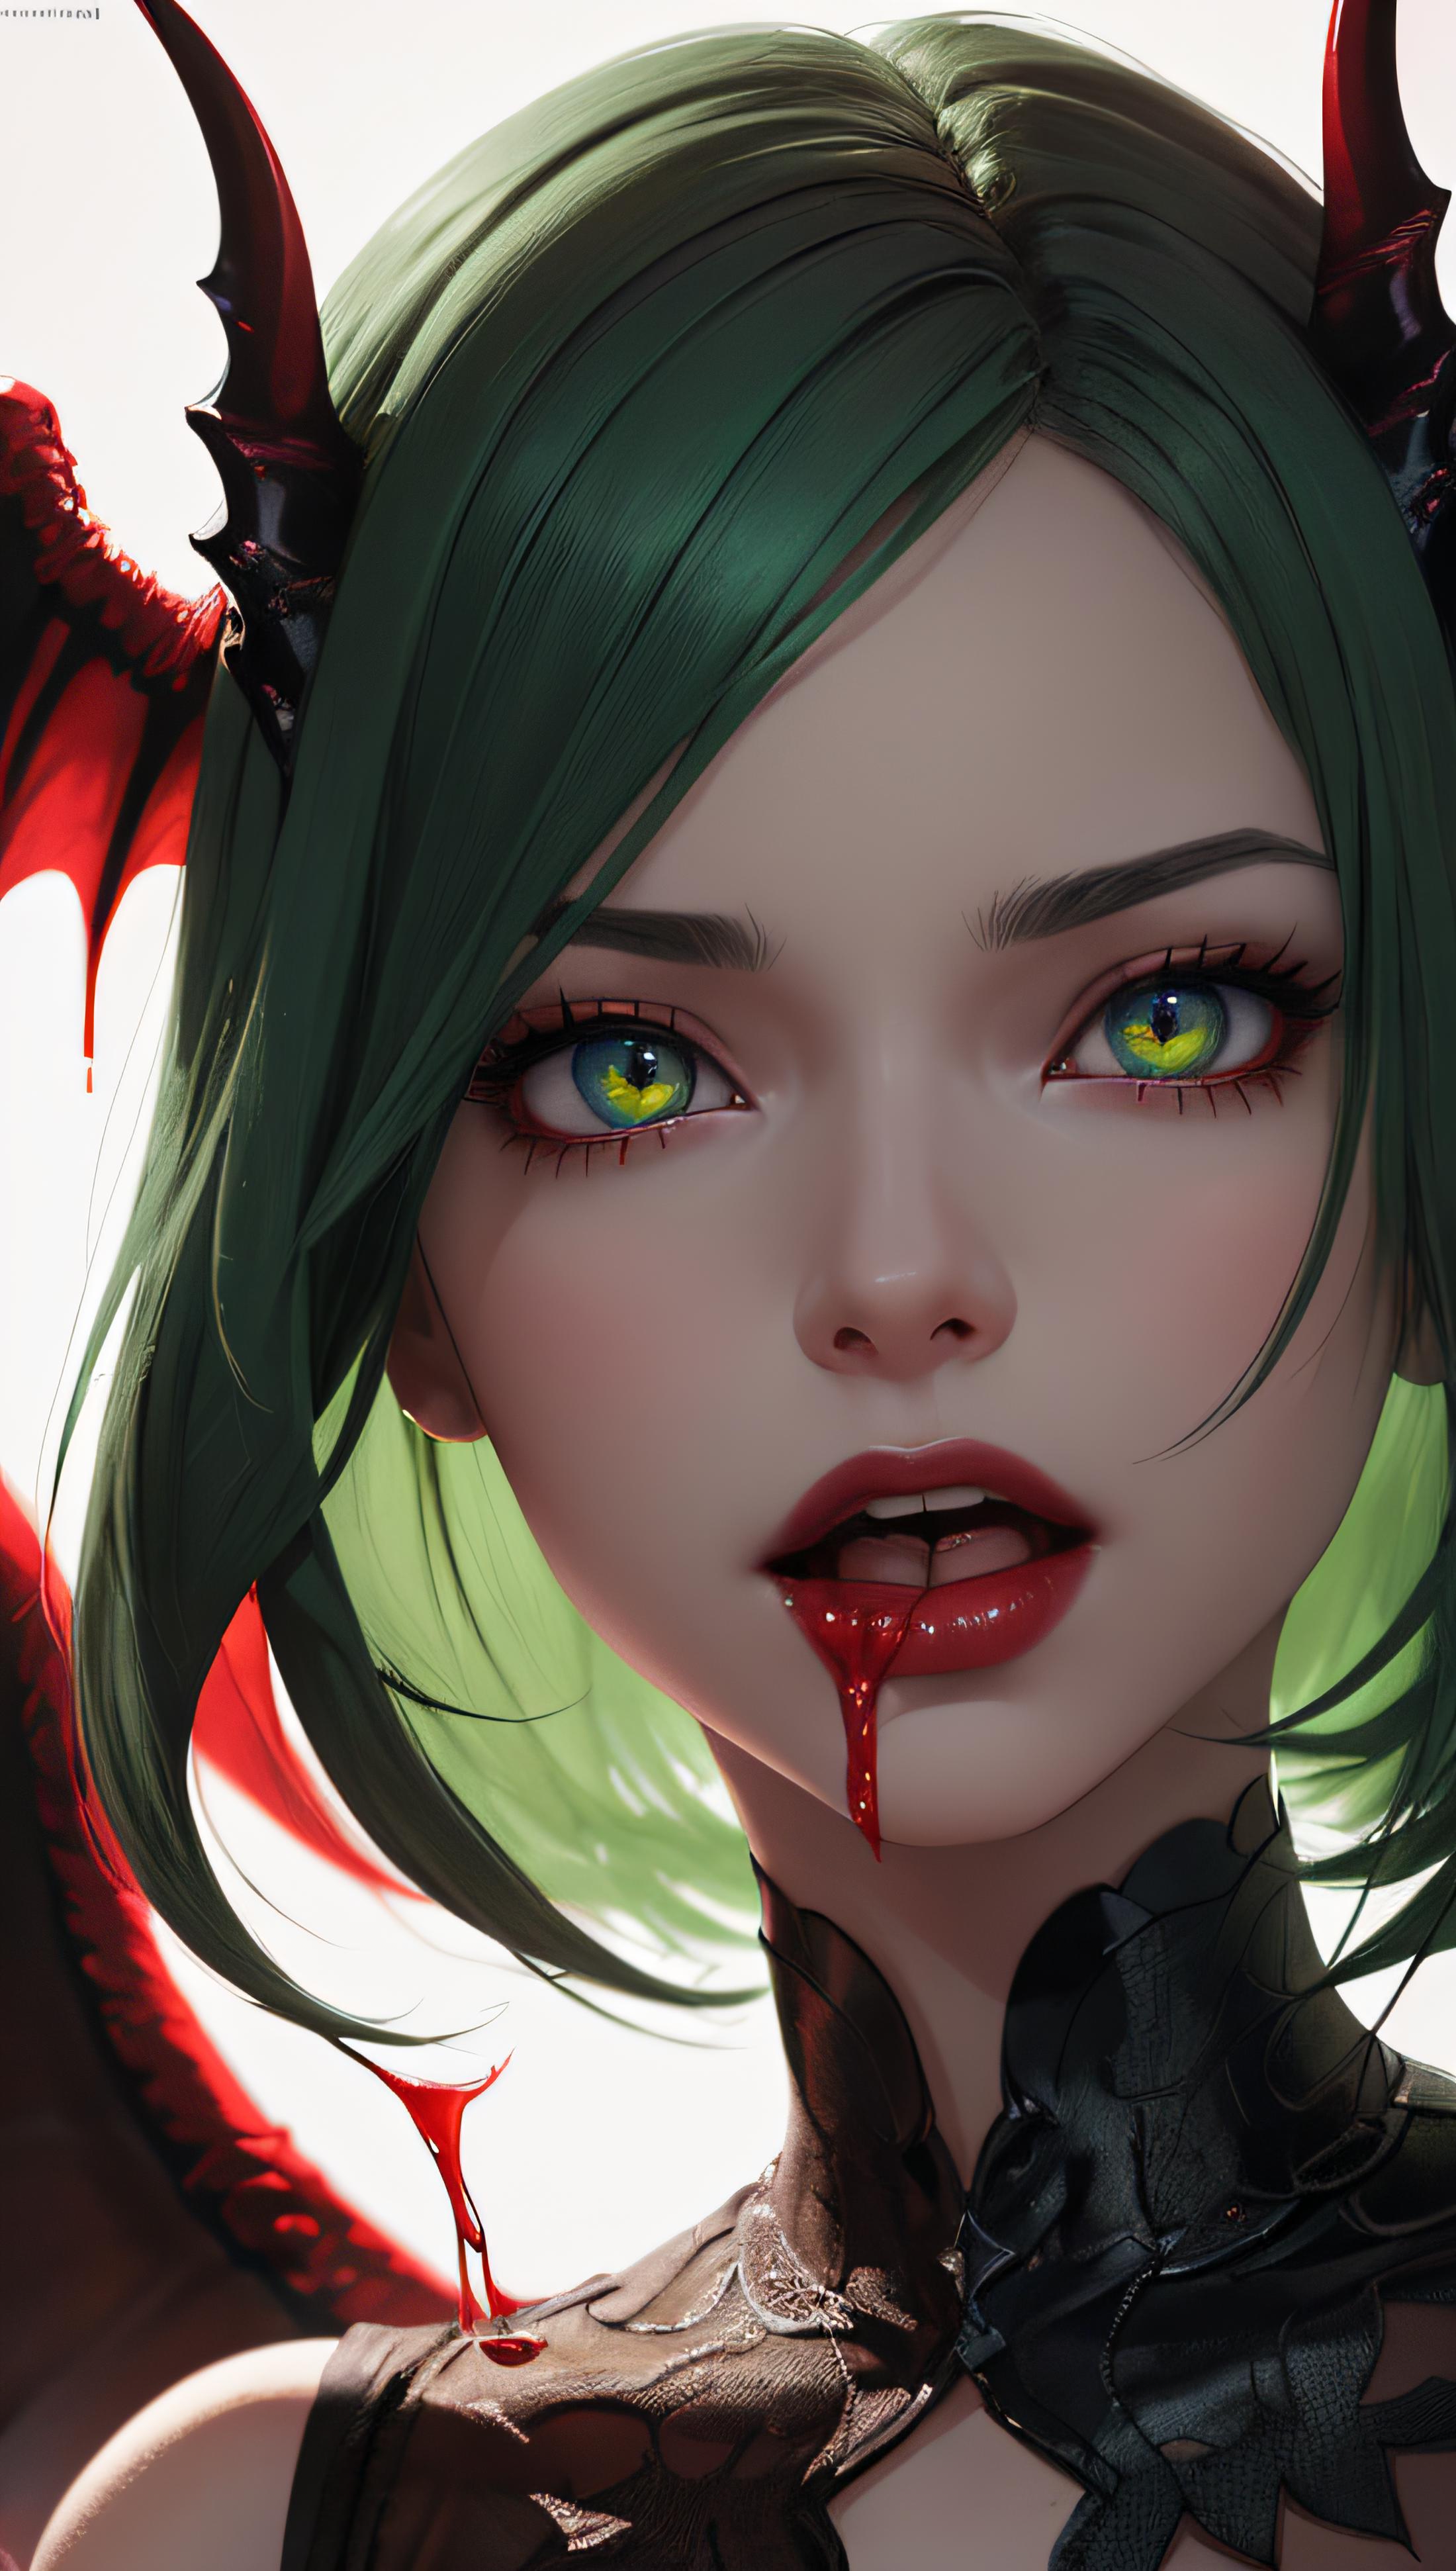 A green-haired woman with red eyes and red lips.